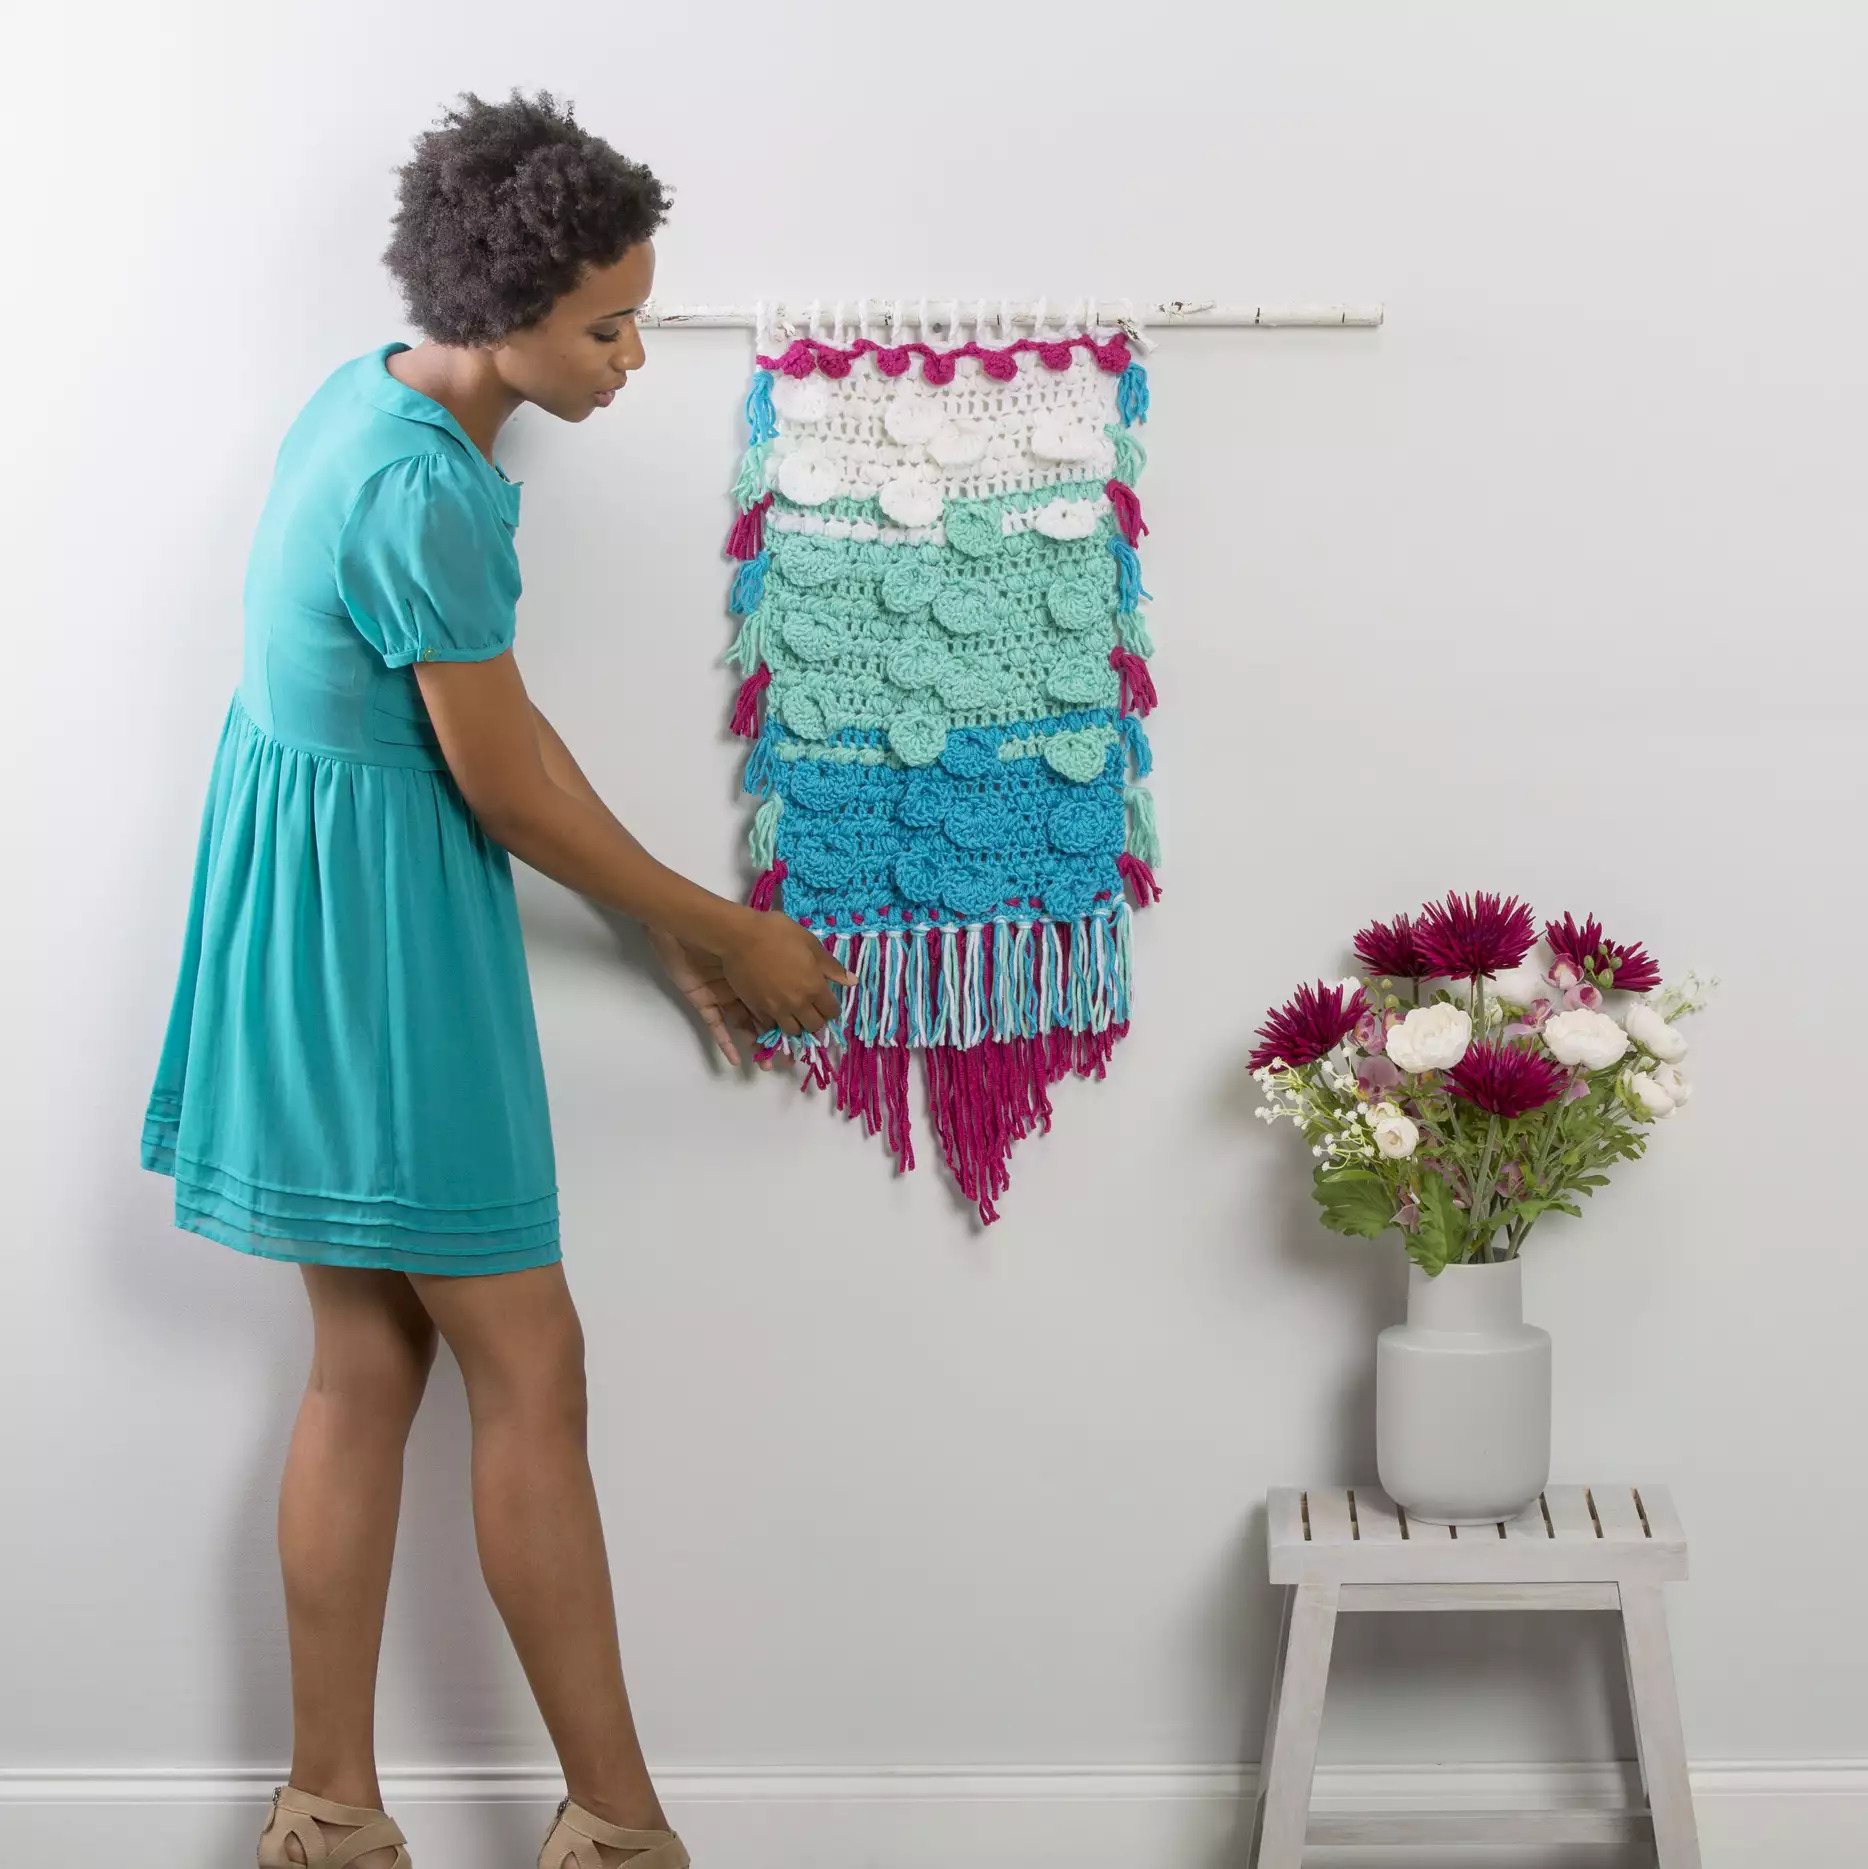 Feel the Texture of Crochet on Your Wall